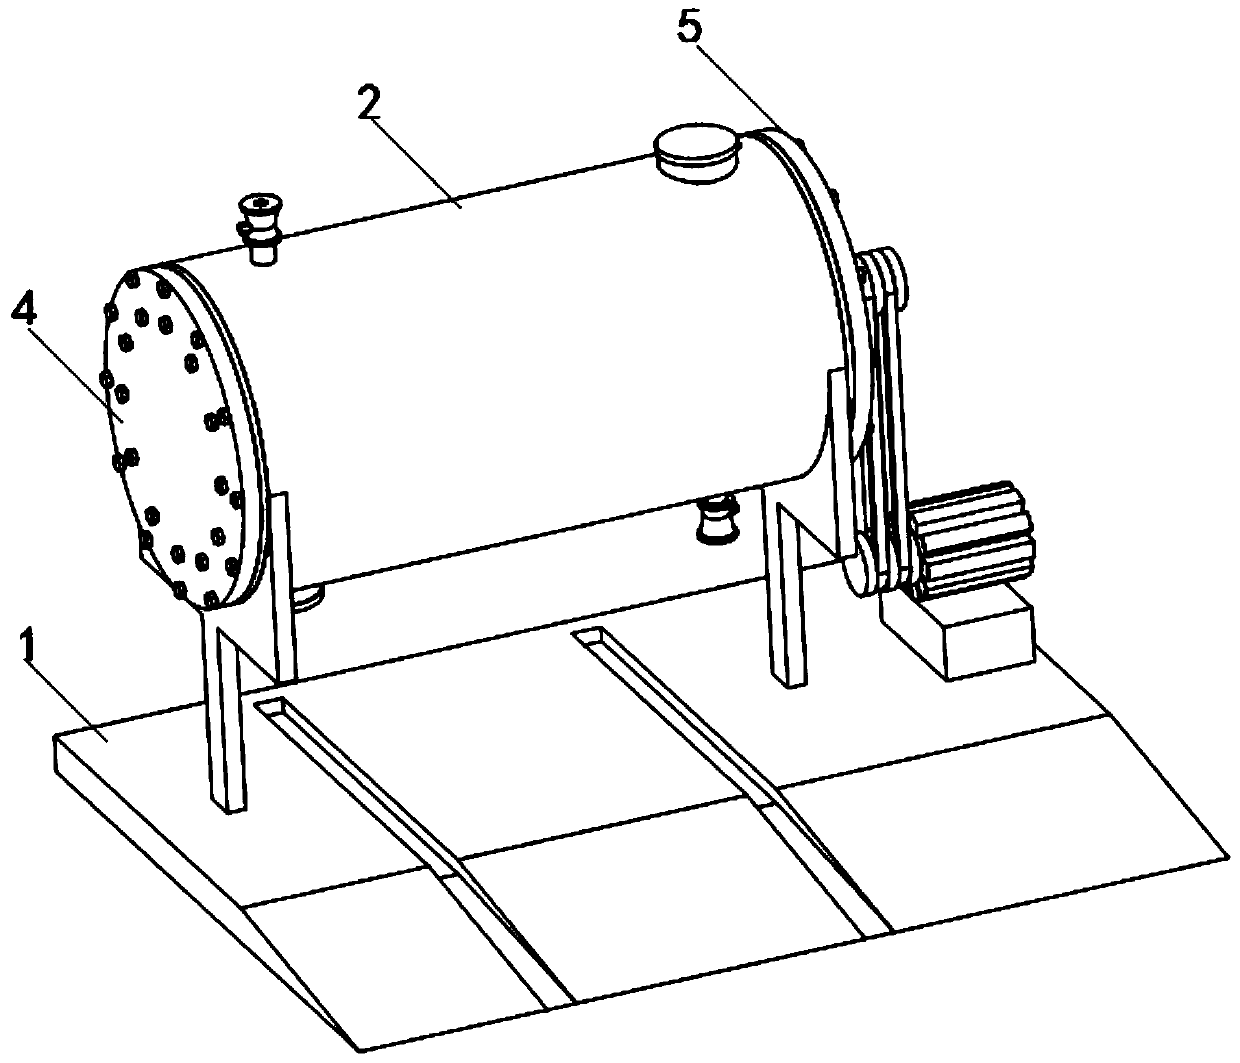 A residential mixing drying device with a anti -material block